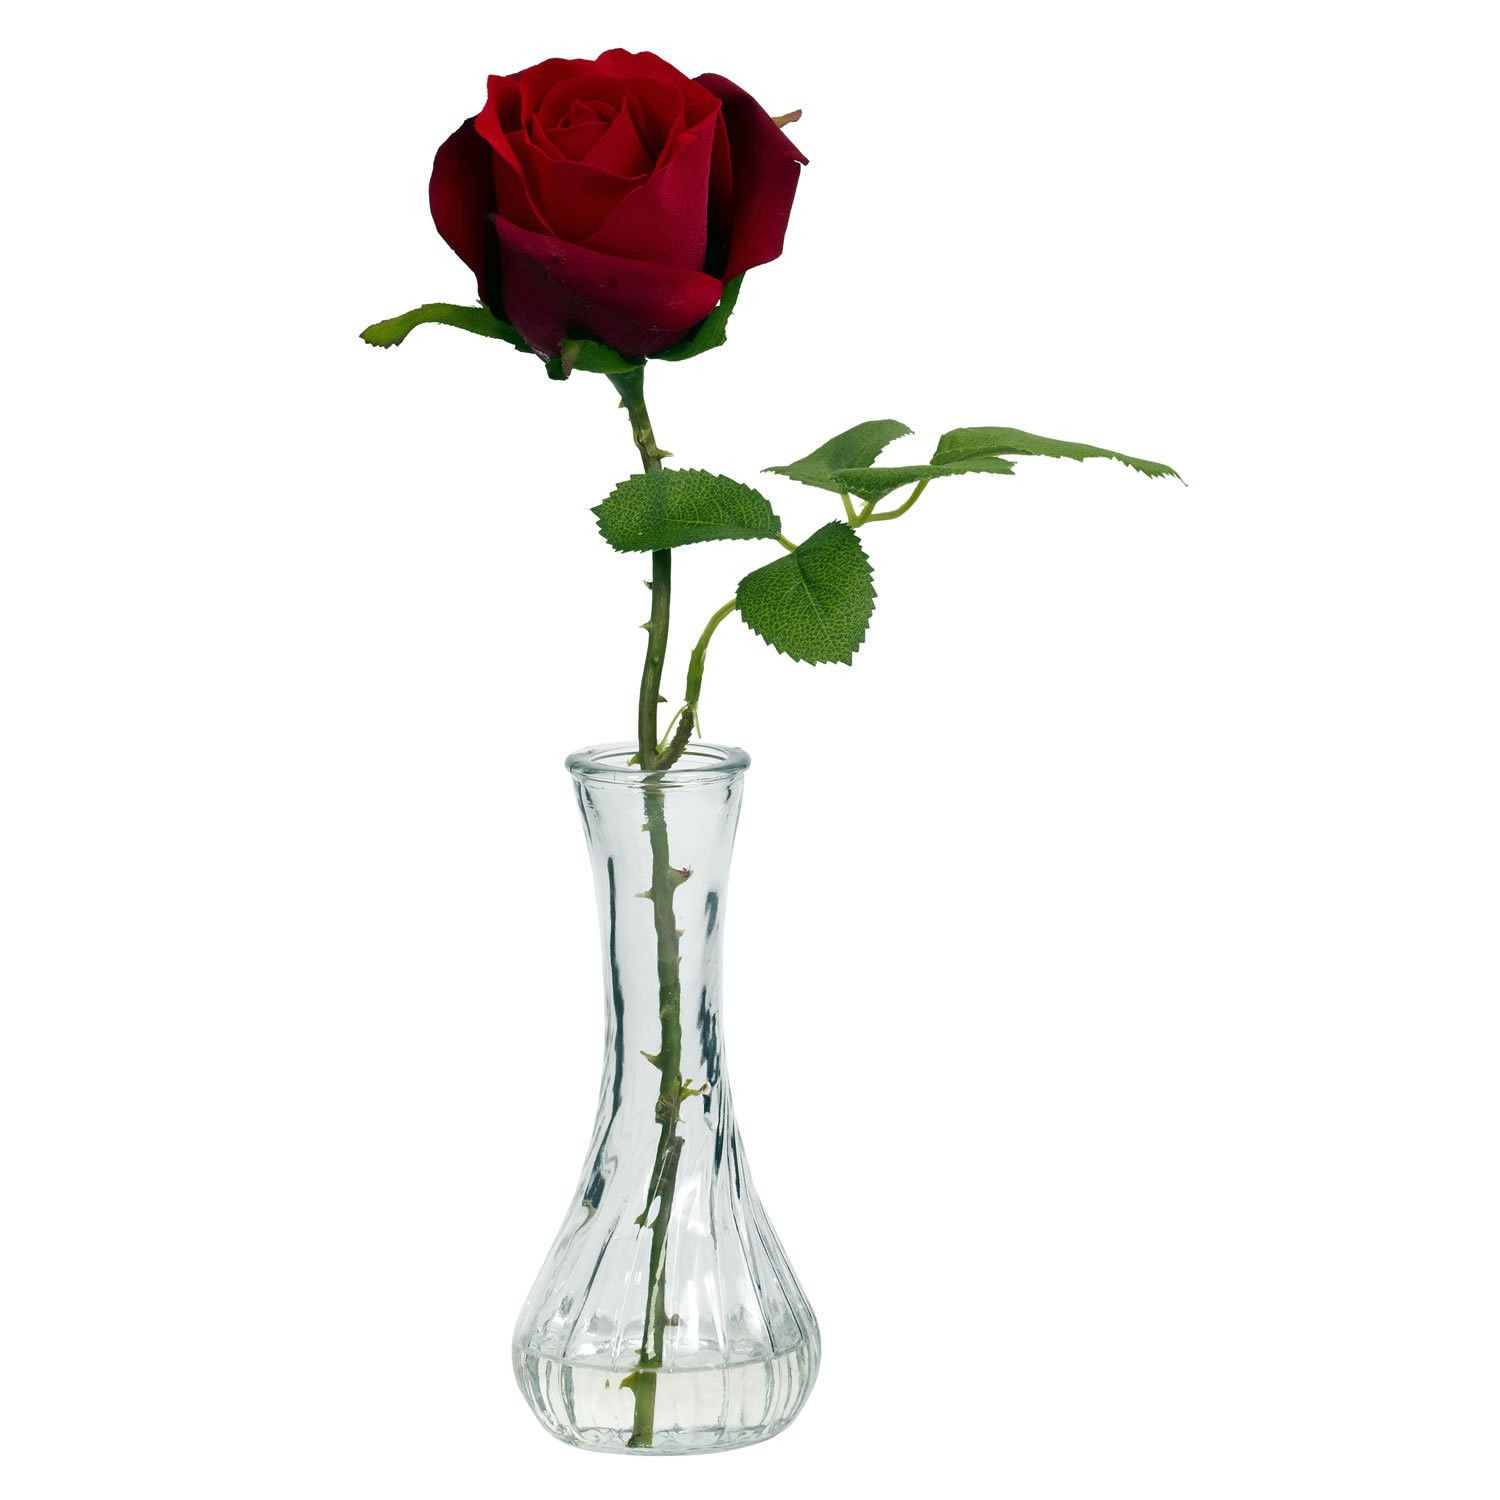 21 Recommended Flowers without Vase 2024 free download flowers without vase of pictures of roses in a vase inspirational vase redh vases single regarding pictures of roses in a vase inspirational vase redh vases single rose in vasei 0d a